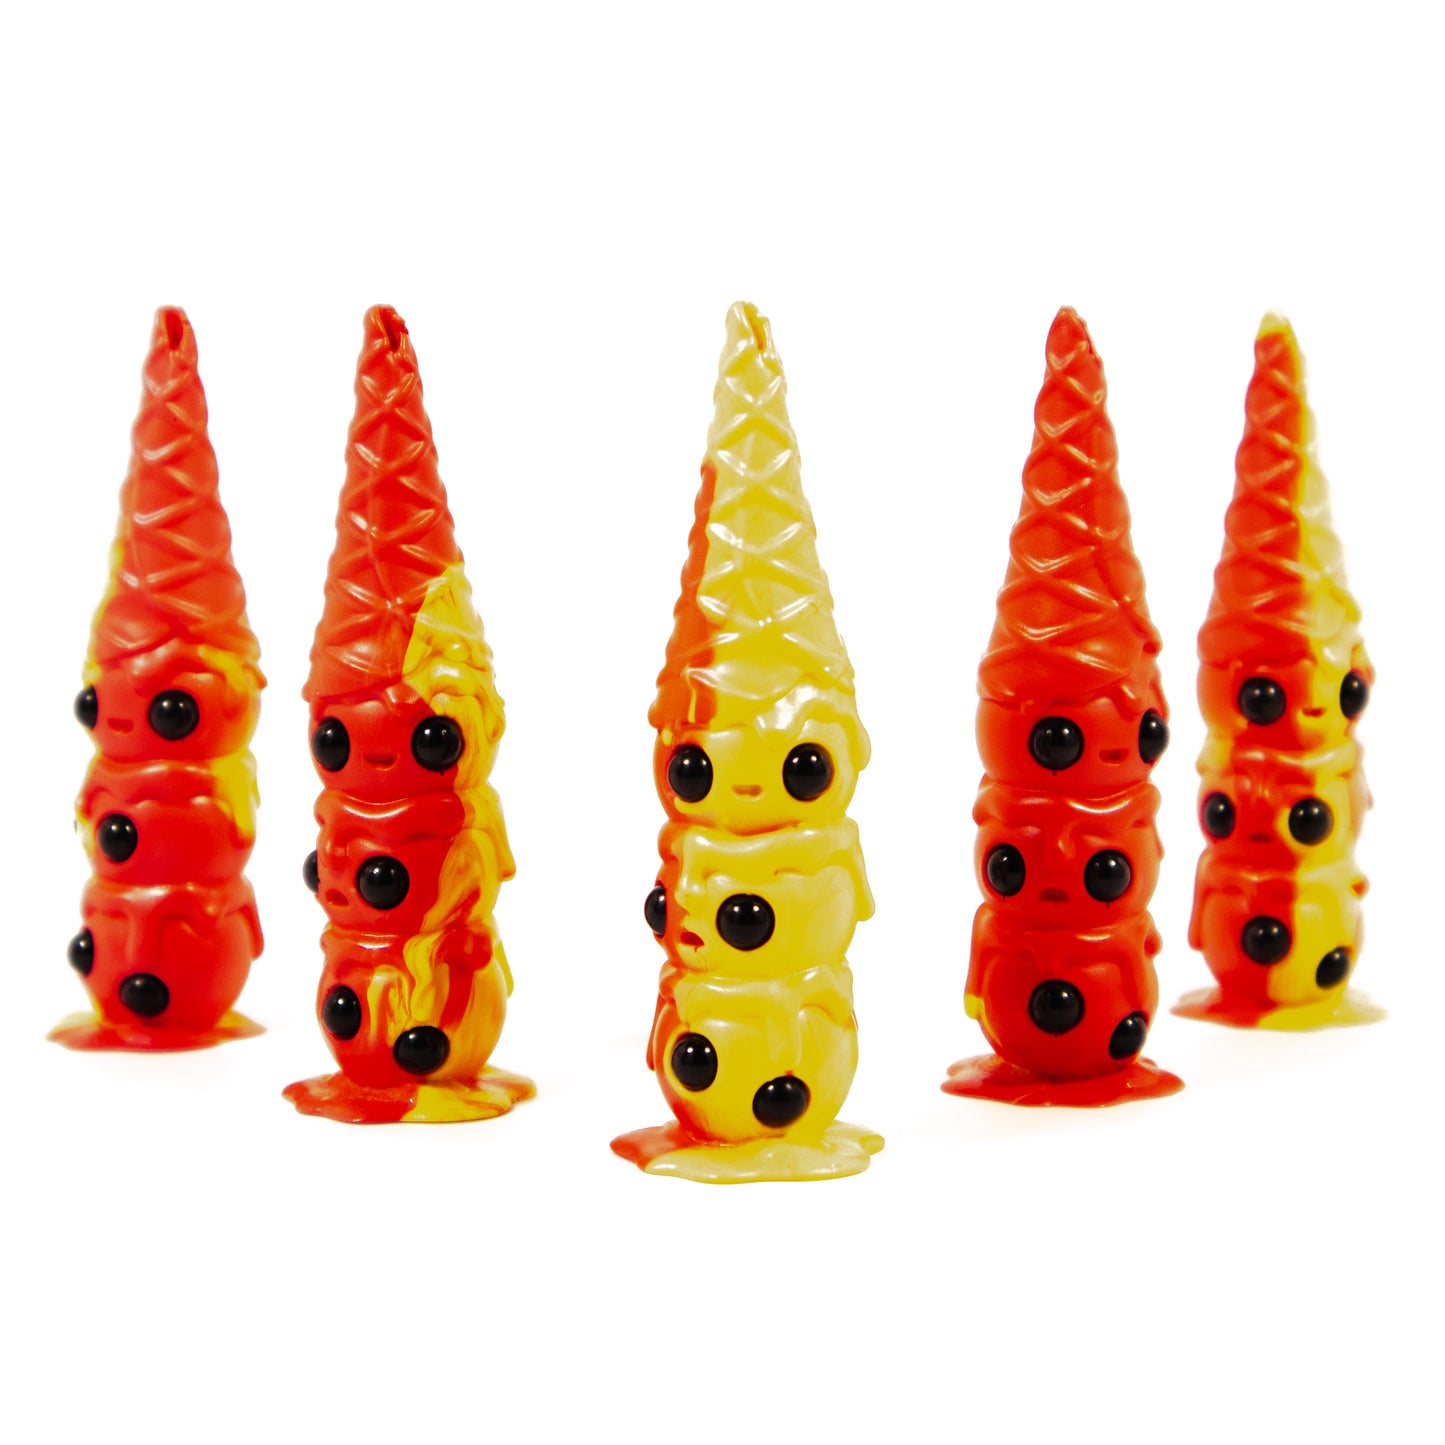 This is Wafull Ketchup & Mustard Limited Edition Resin Figure